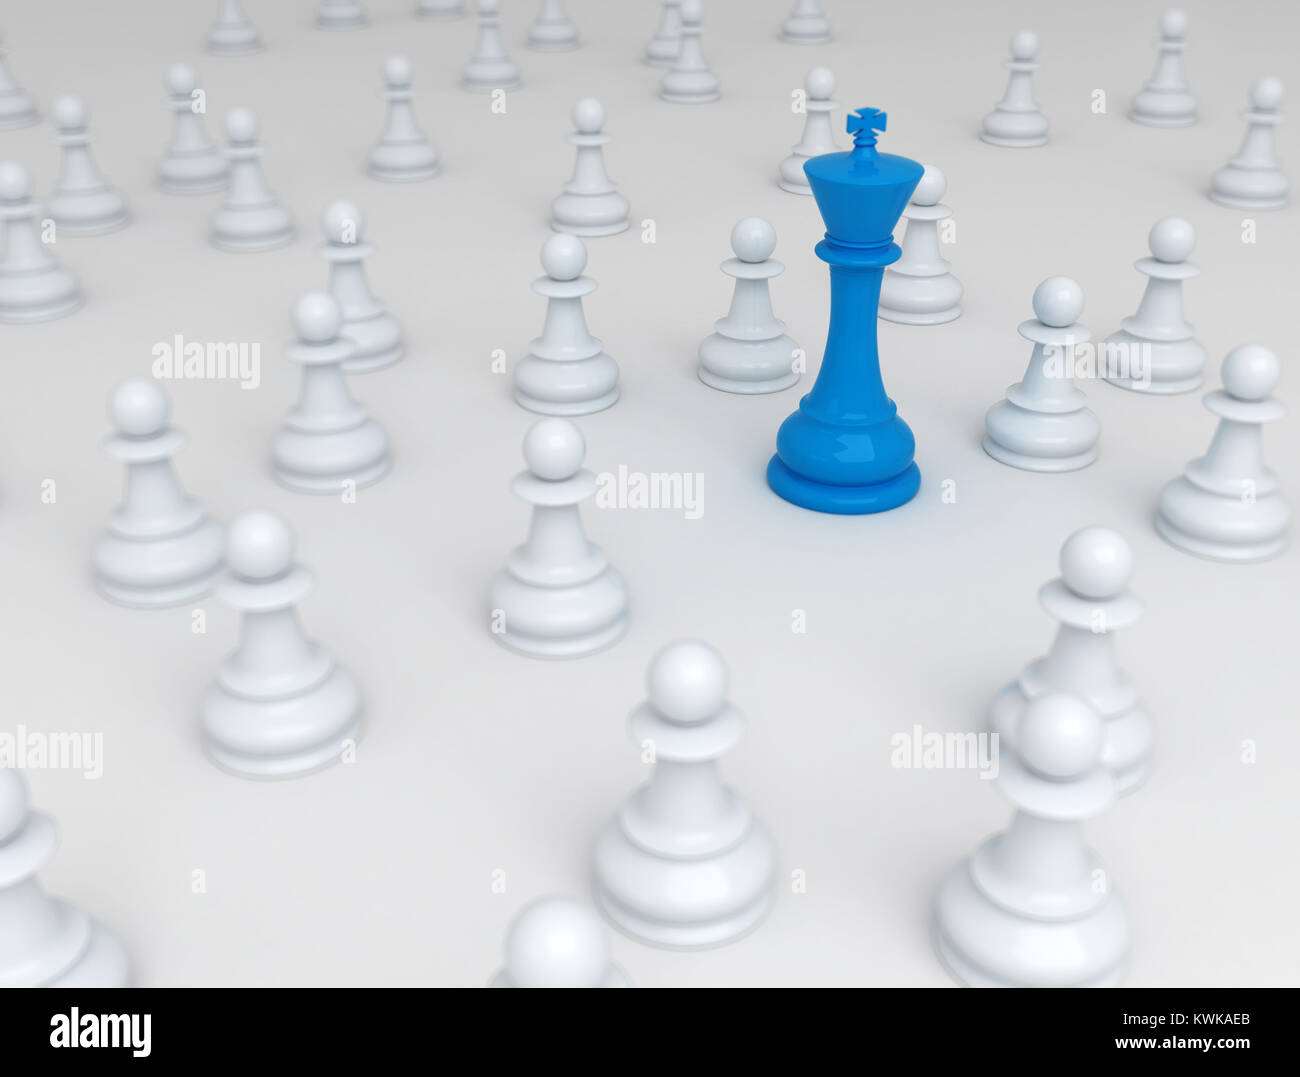 Blue chess king standing out - Business conceptual background Stock Photo